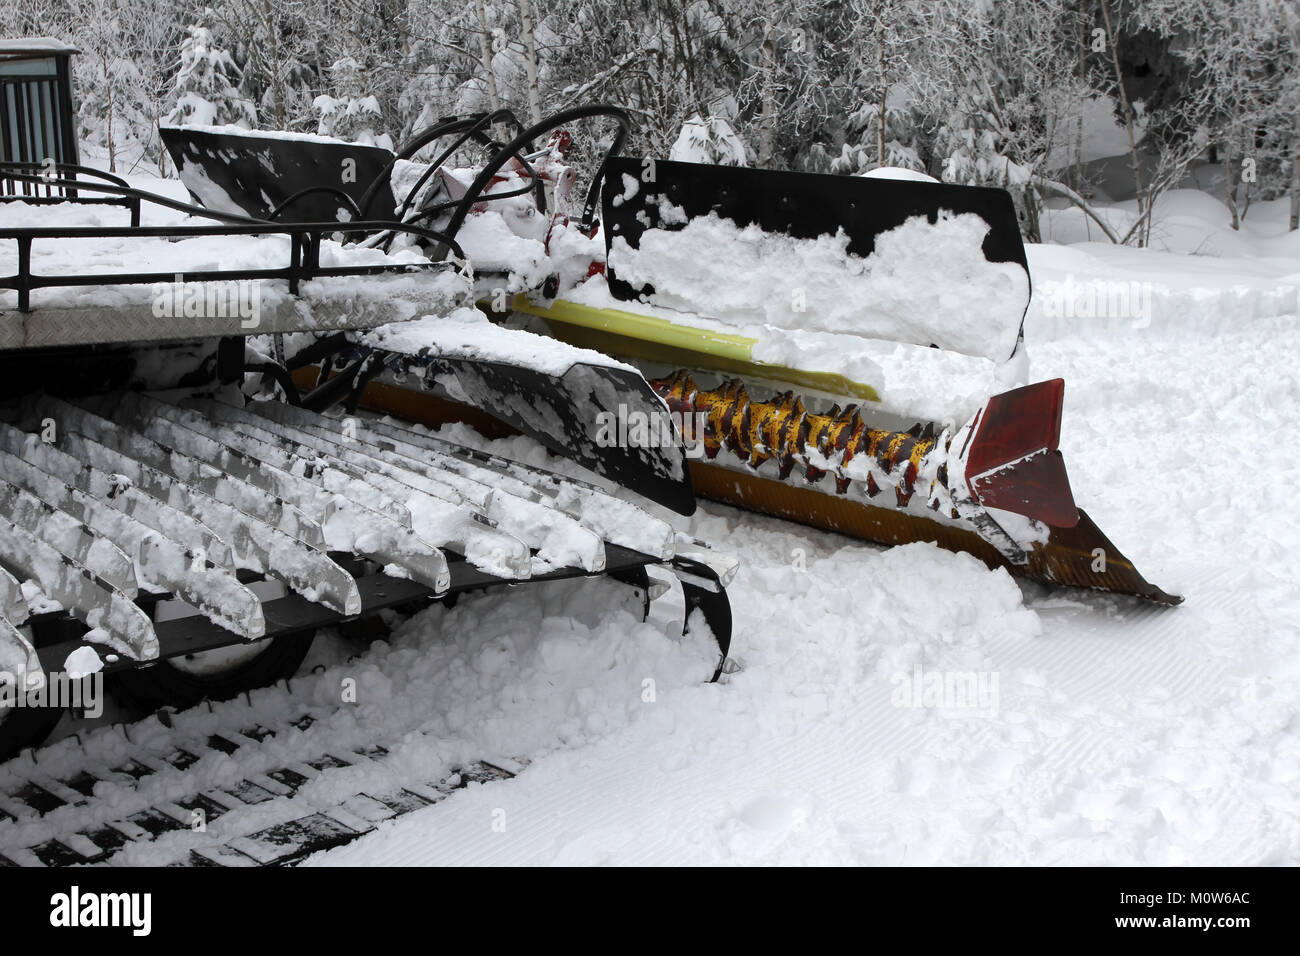 Ratrac. Ratrack, snow grooming machine prepares slopes for skiers on a ski resort in mountains. Ratrac machine for skiing slope preparations in the mo Stock Photo